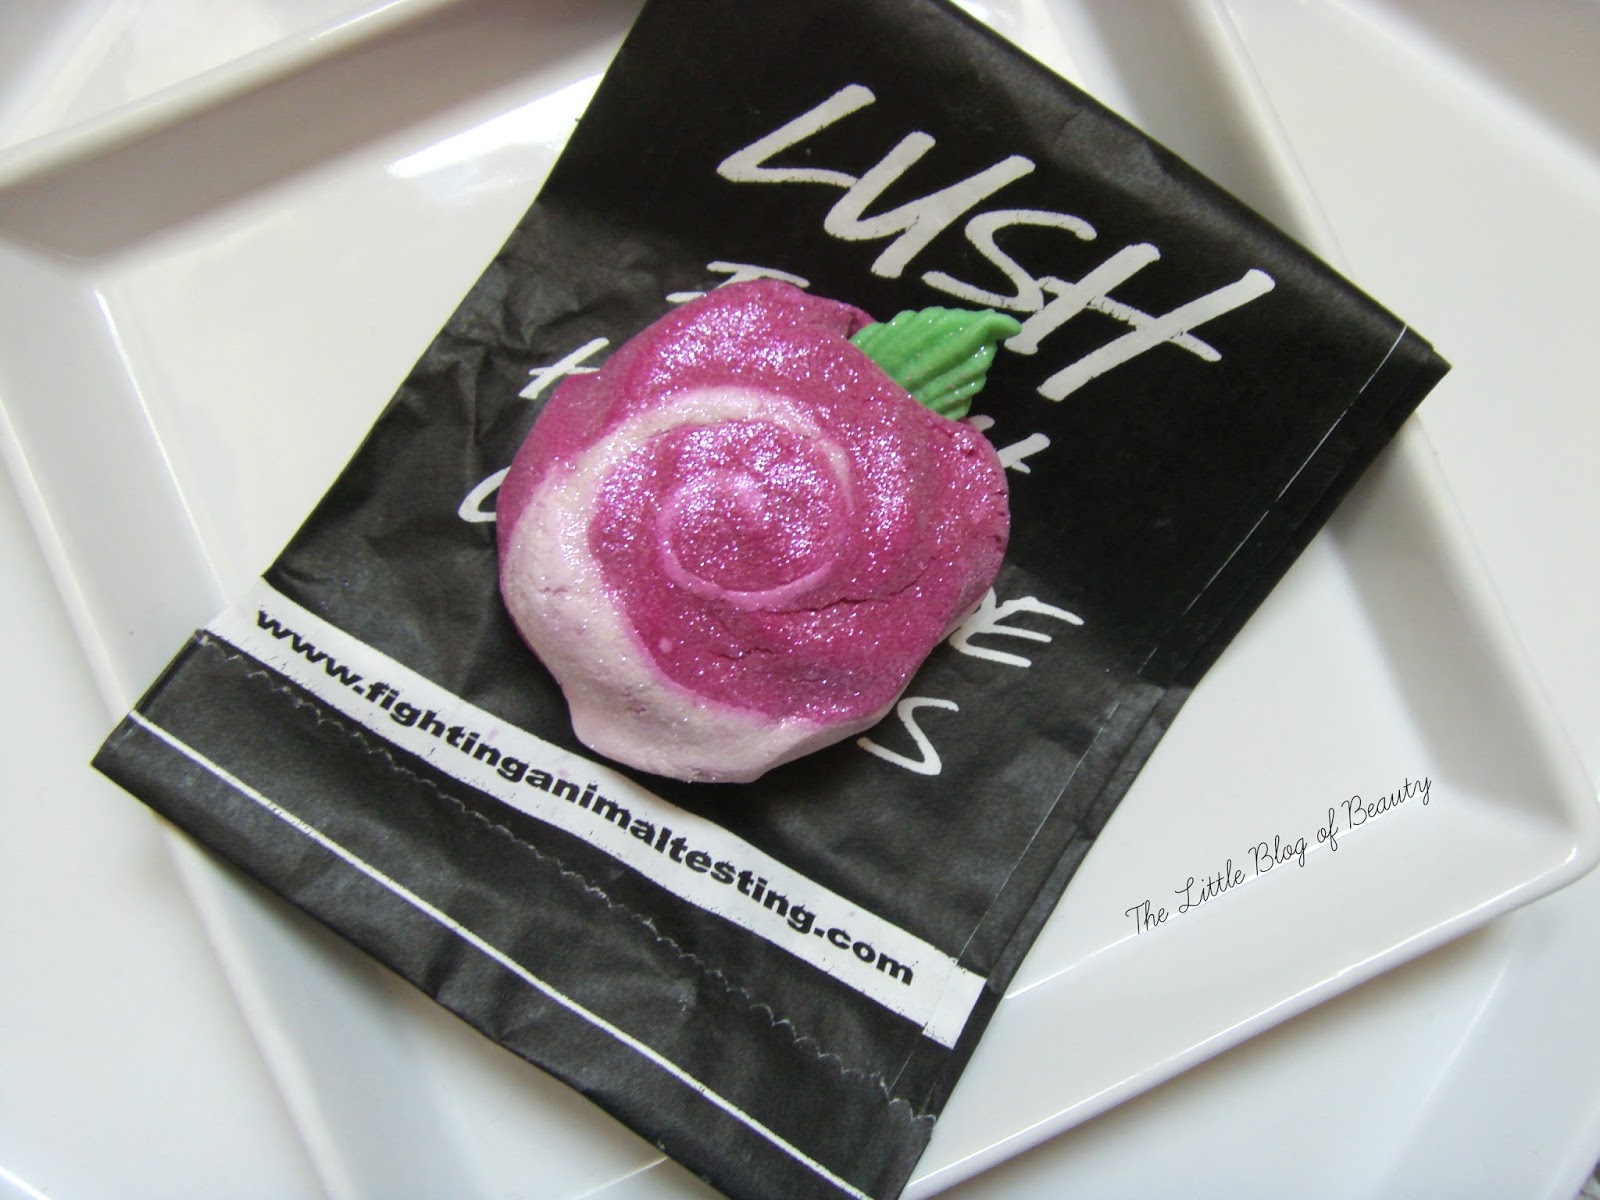 Lush Mothers day Rose bubble bar